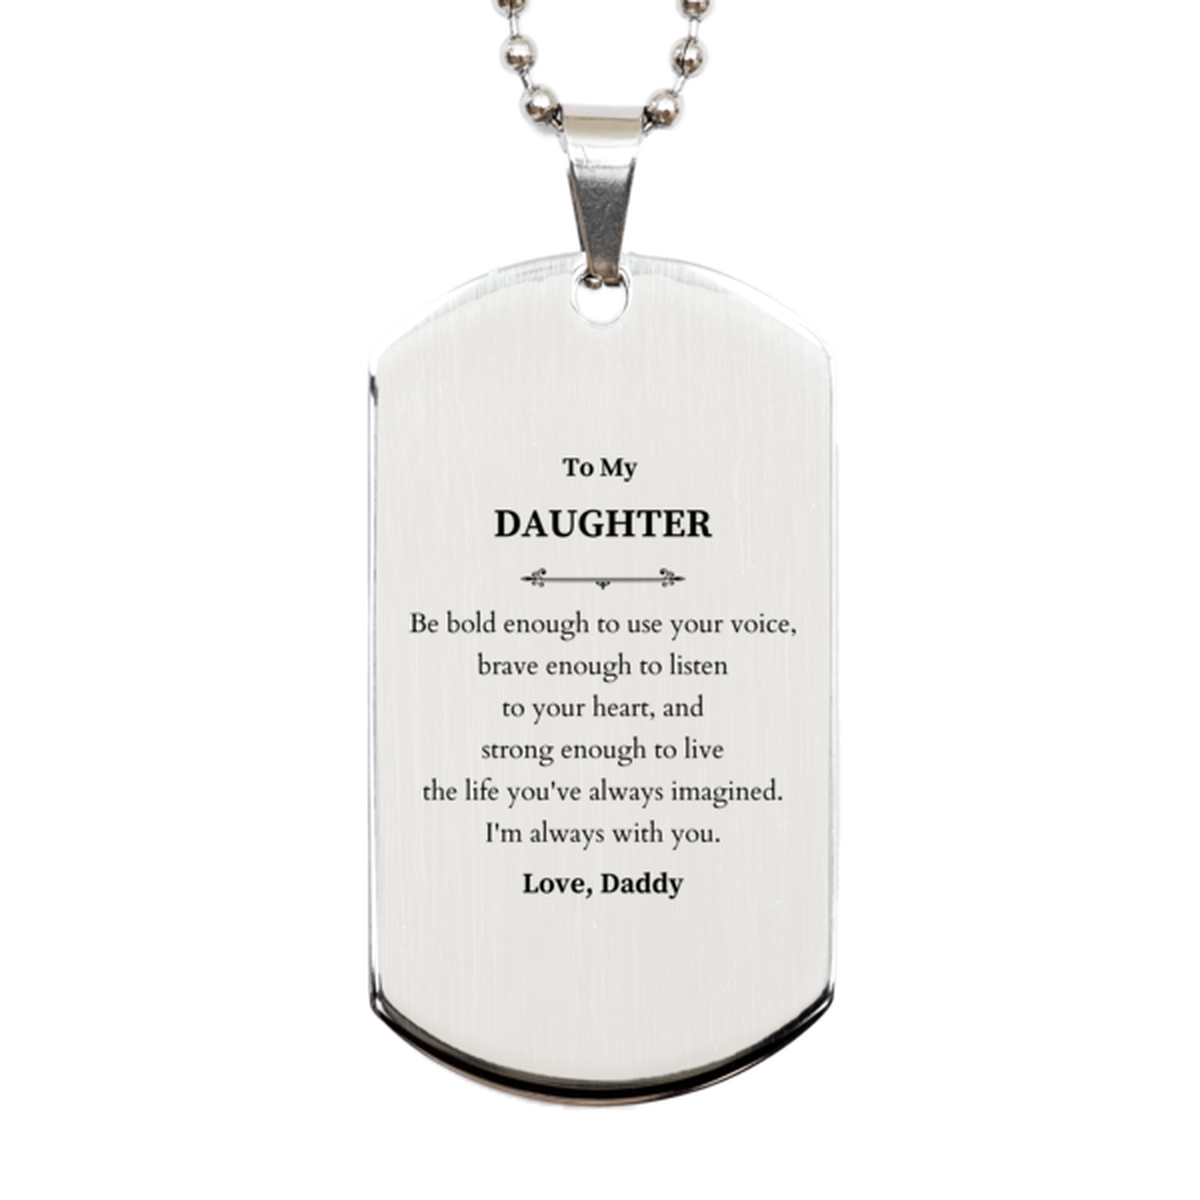 Keepsake Daughter Silver Dog Tag Gift Idea Graduation Christmas Birthday Daughter from Daddy, Daughter Be bold enough to use your voice, brave enough to listen to your heart. Love, Daddy